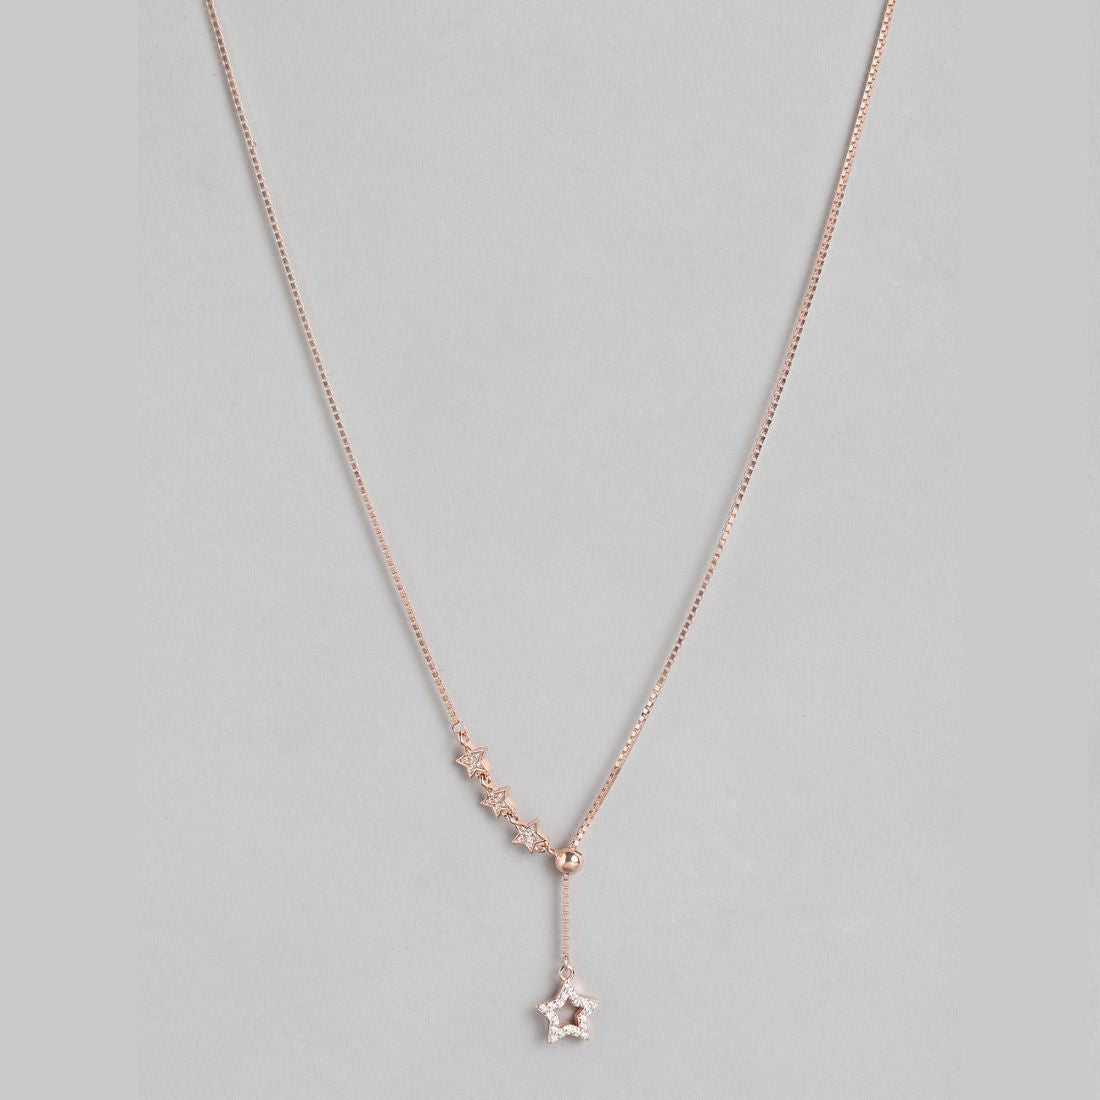 Shining Constellations Rose Gold Plated 925 Sterling Silver Star Necklace